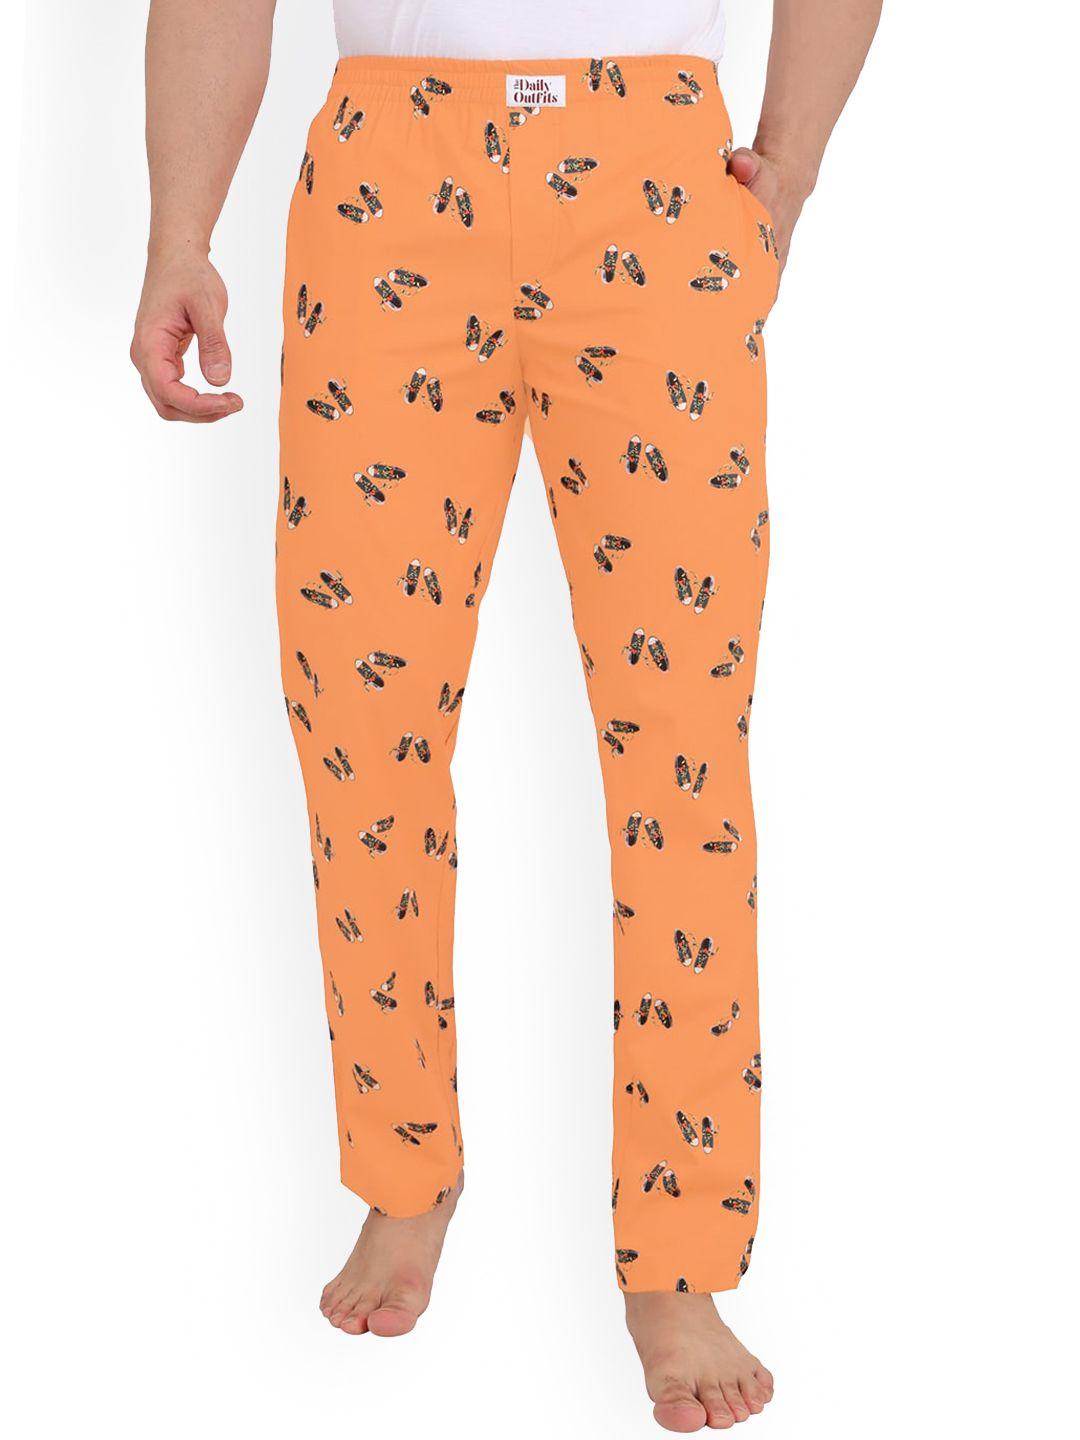 the daily outfits men orange conversational printed cotton lounge pants